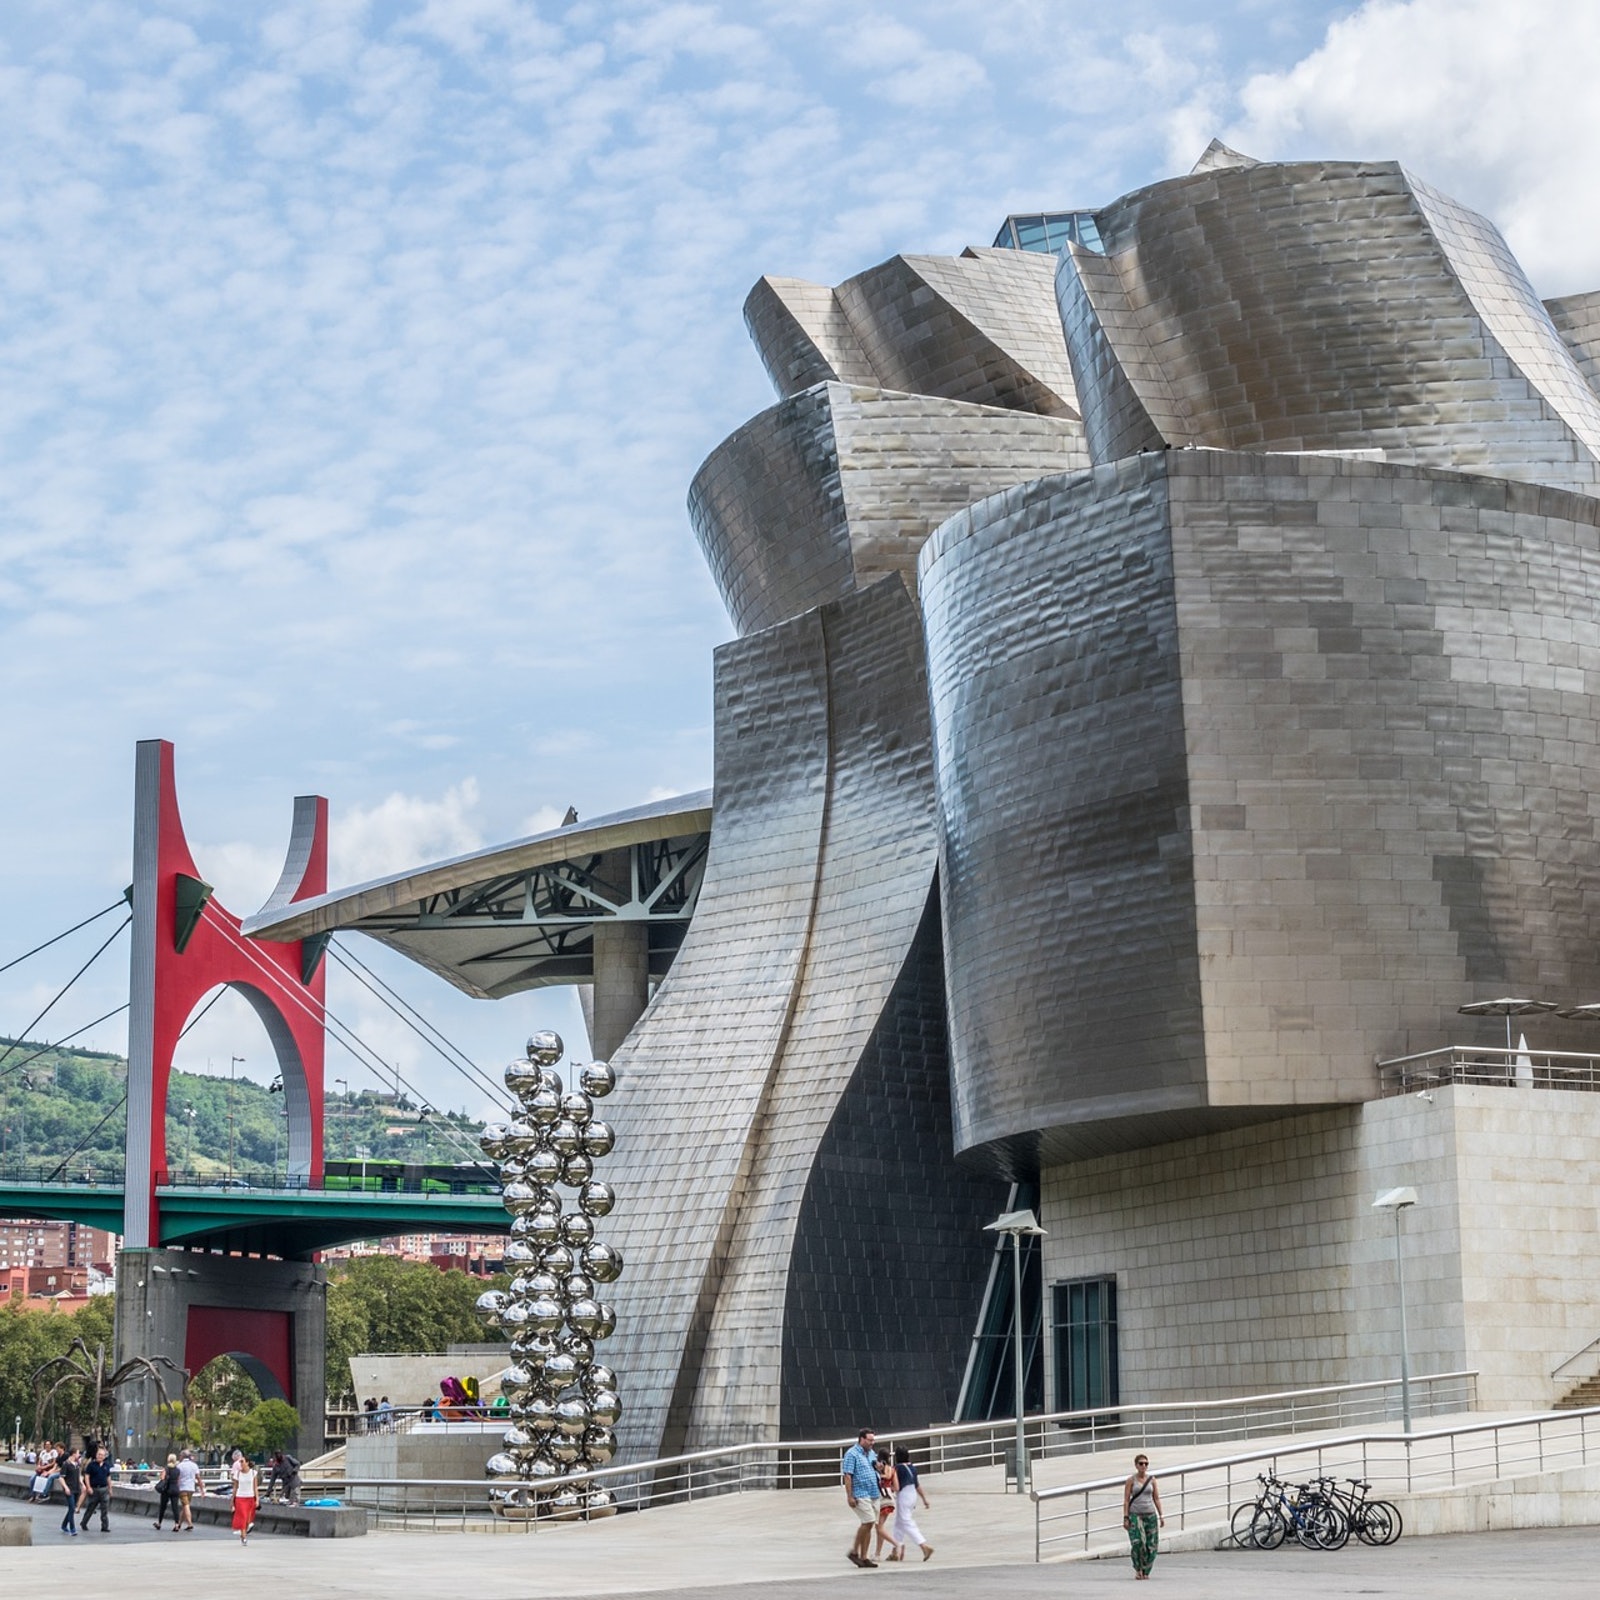 Guggenheim Bilbao Museum: Frank Gehry and Bilbao Tour + Admission in Spain